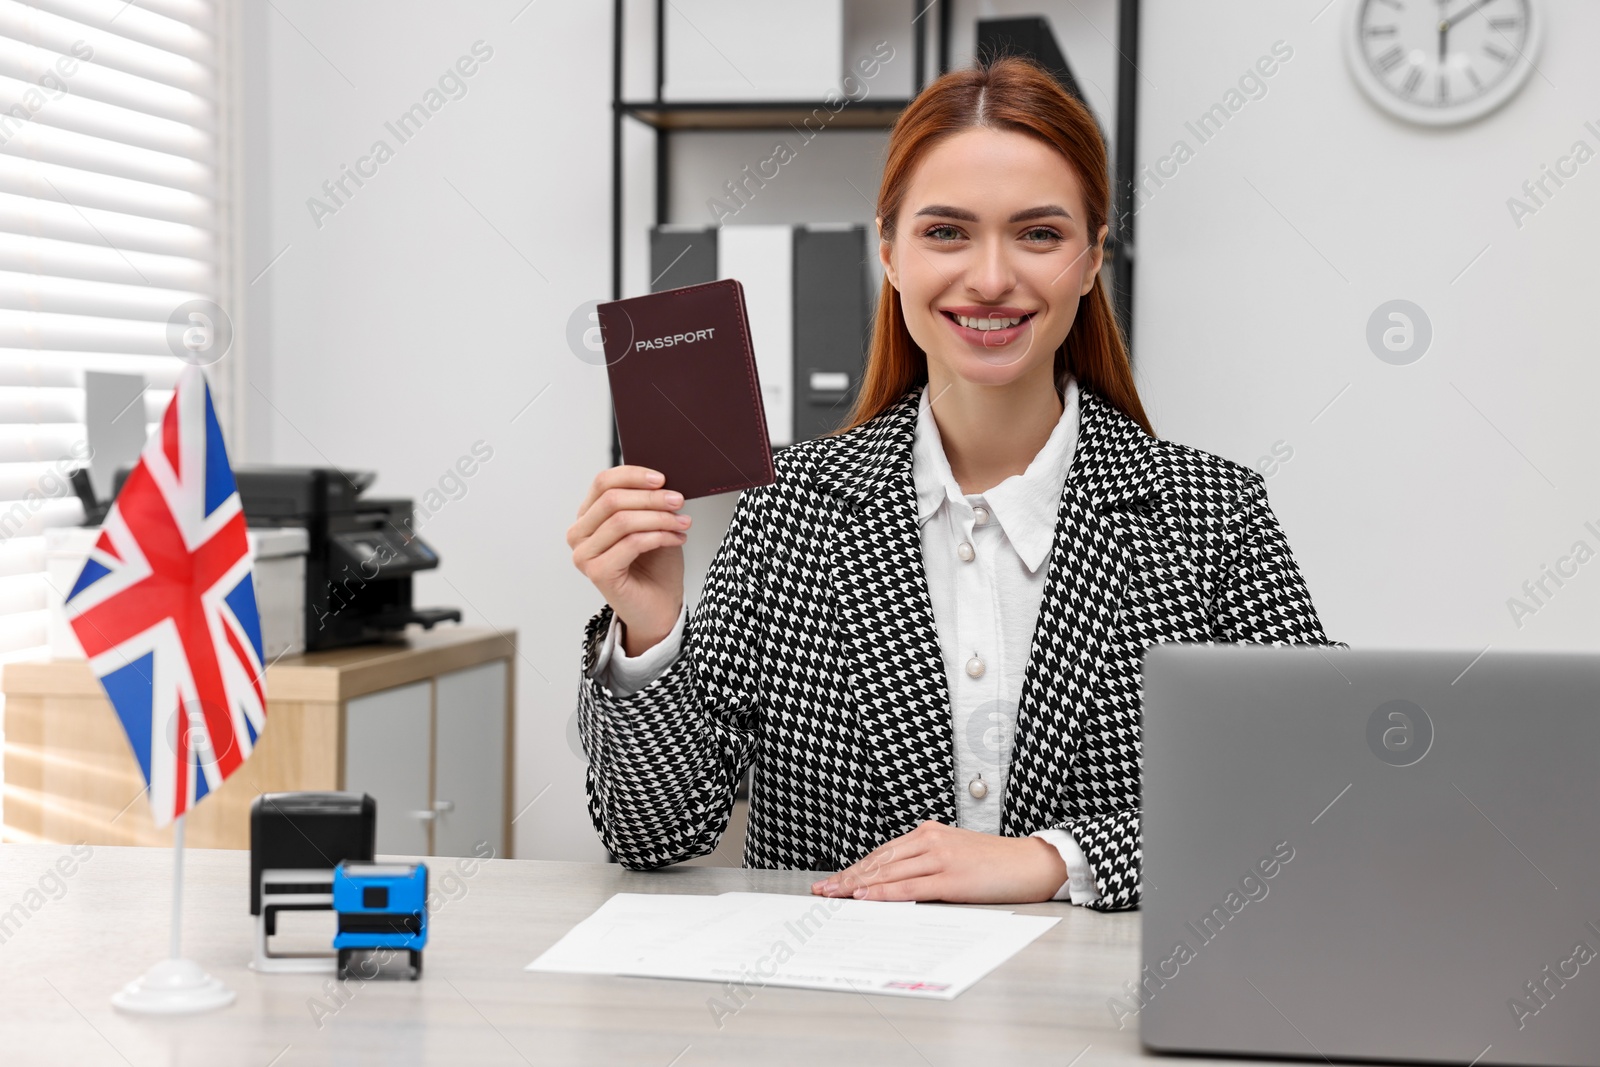 Photo of Immigration to United Kingdom. Smiling embassy worker with passport and documents at table in office